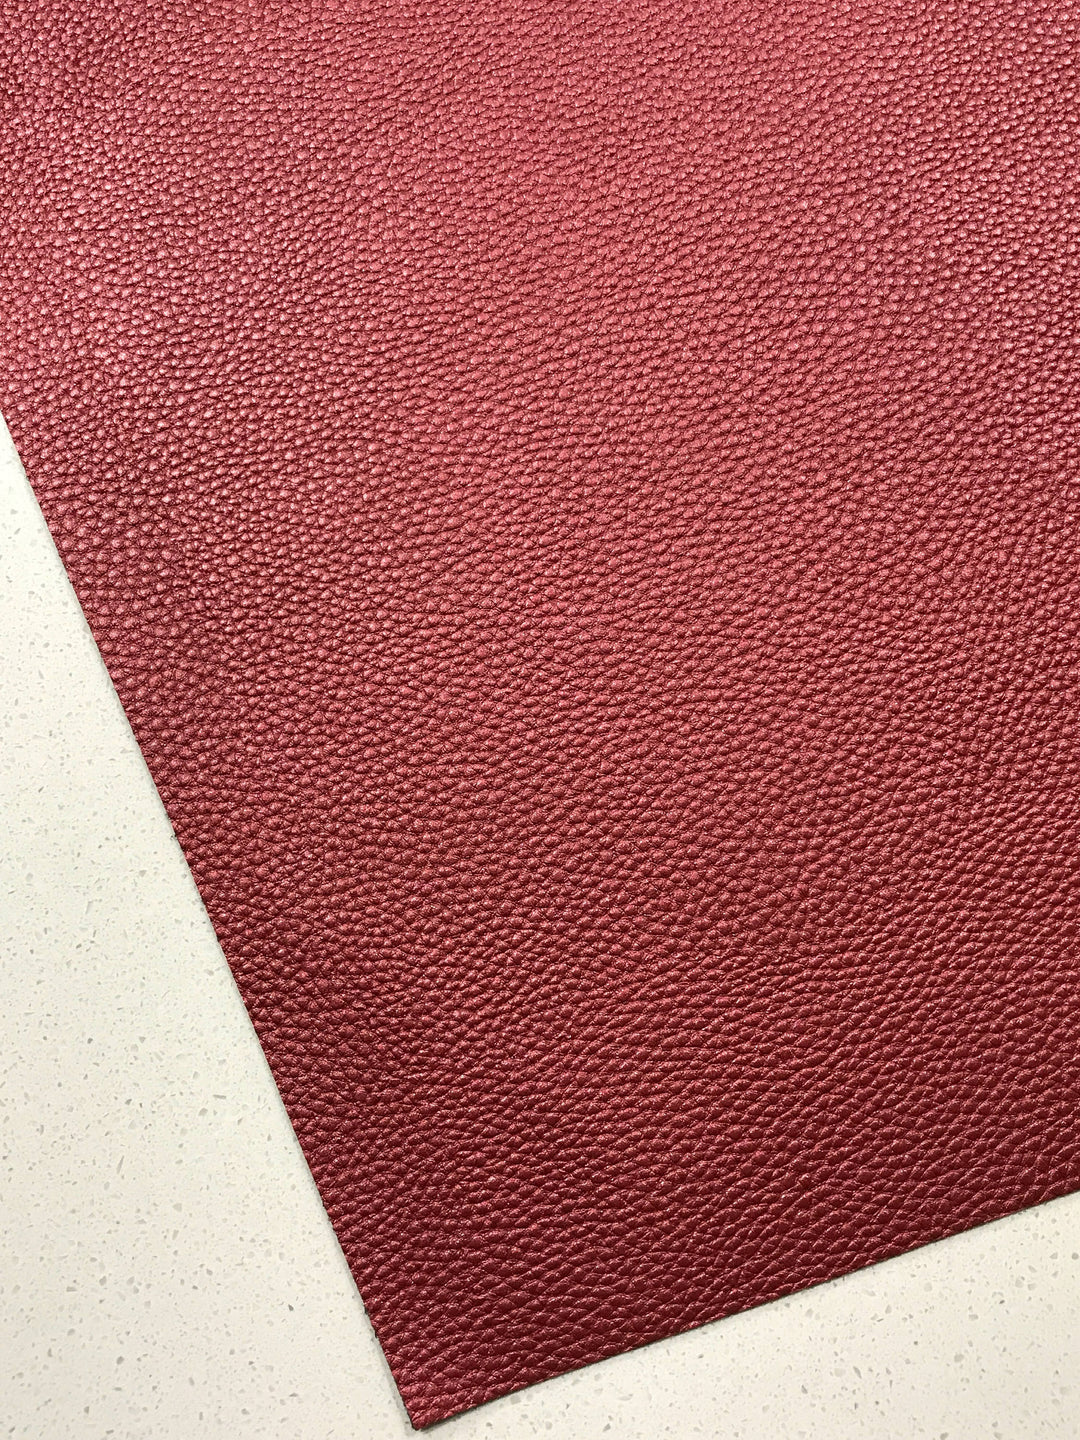 Pearl Burgundy Leatherette Sheet 1.0mm Thickness A4 or A5 Size Faux Leather Fabric